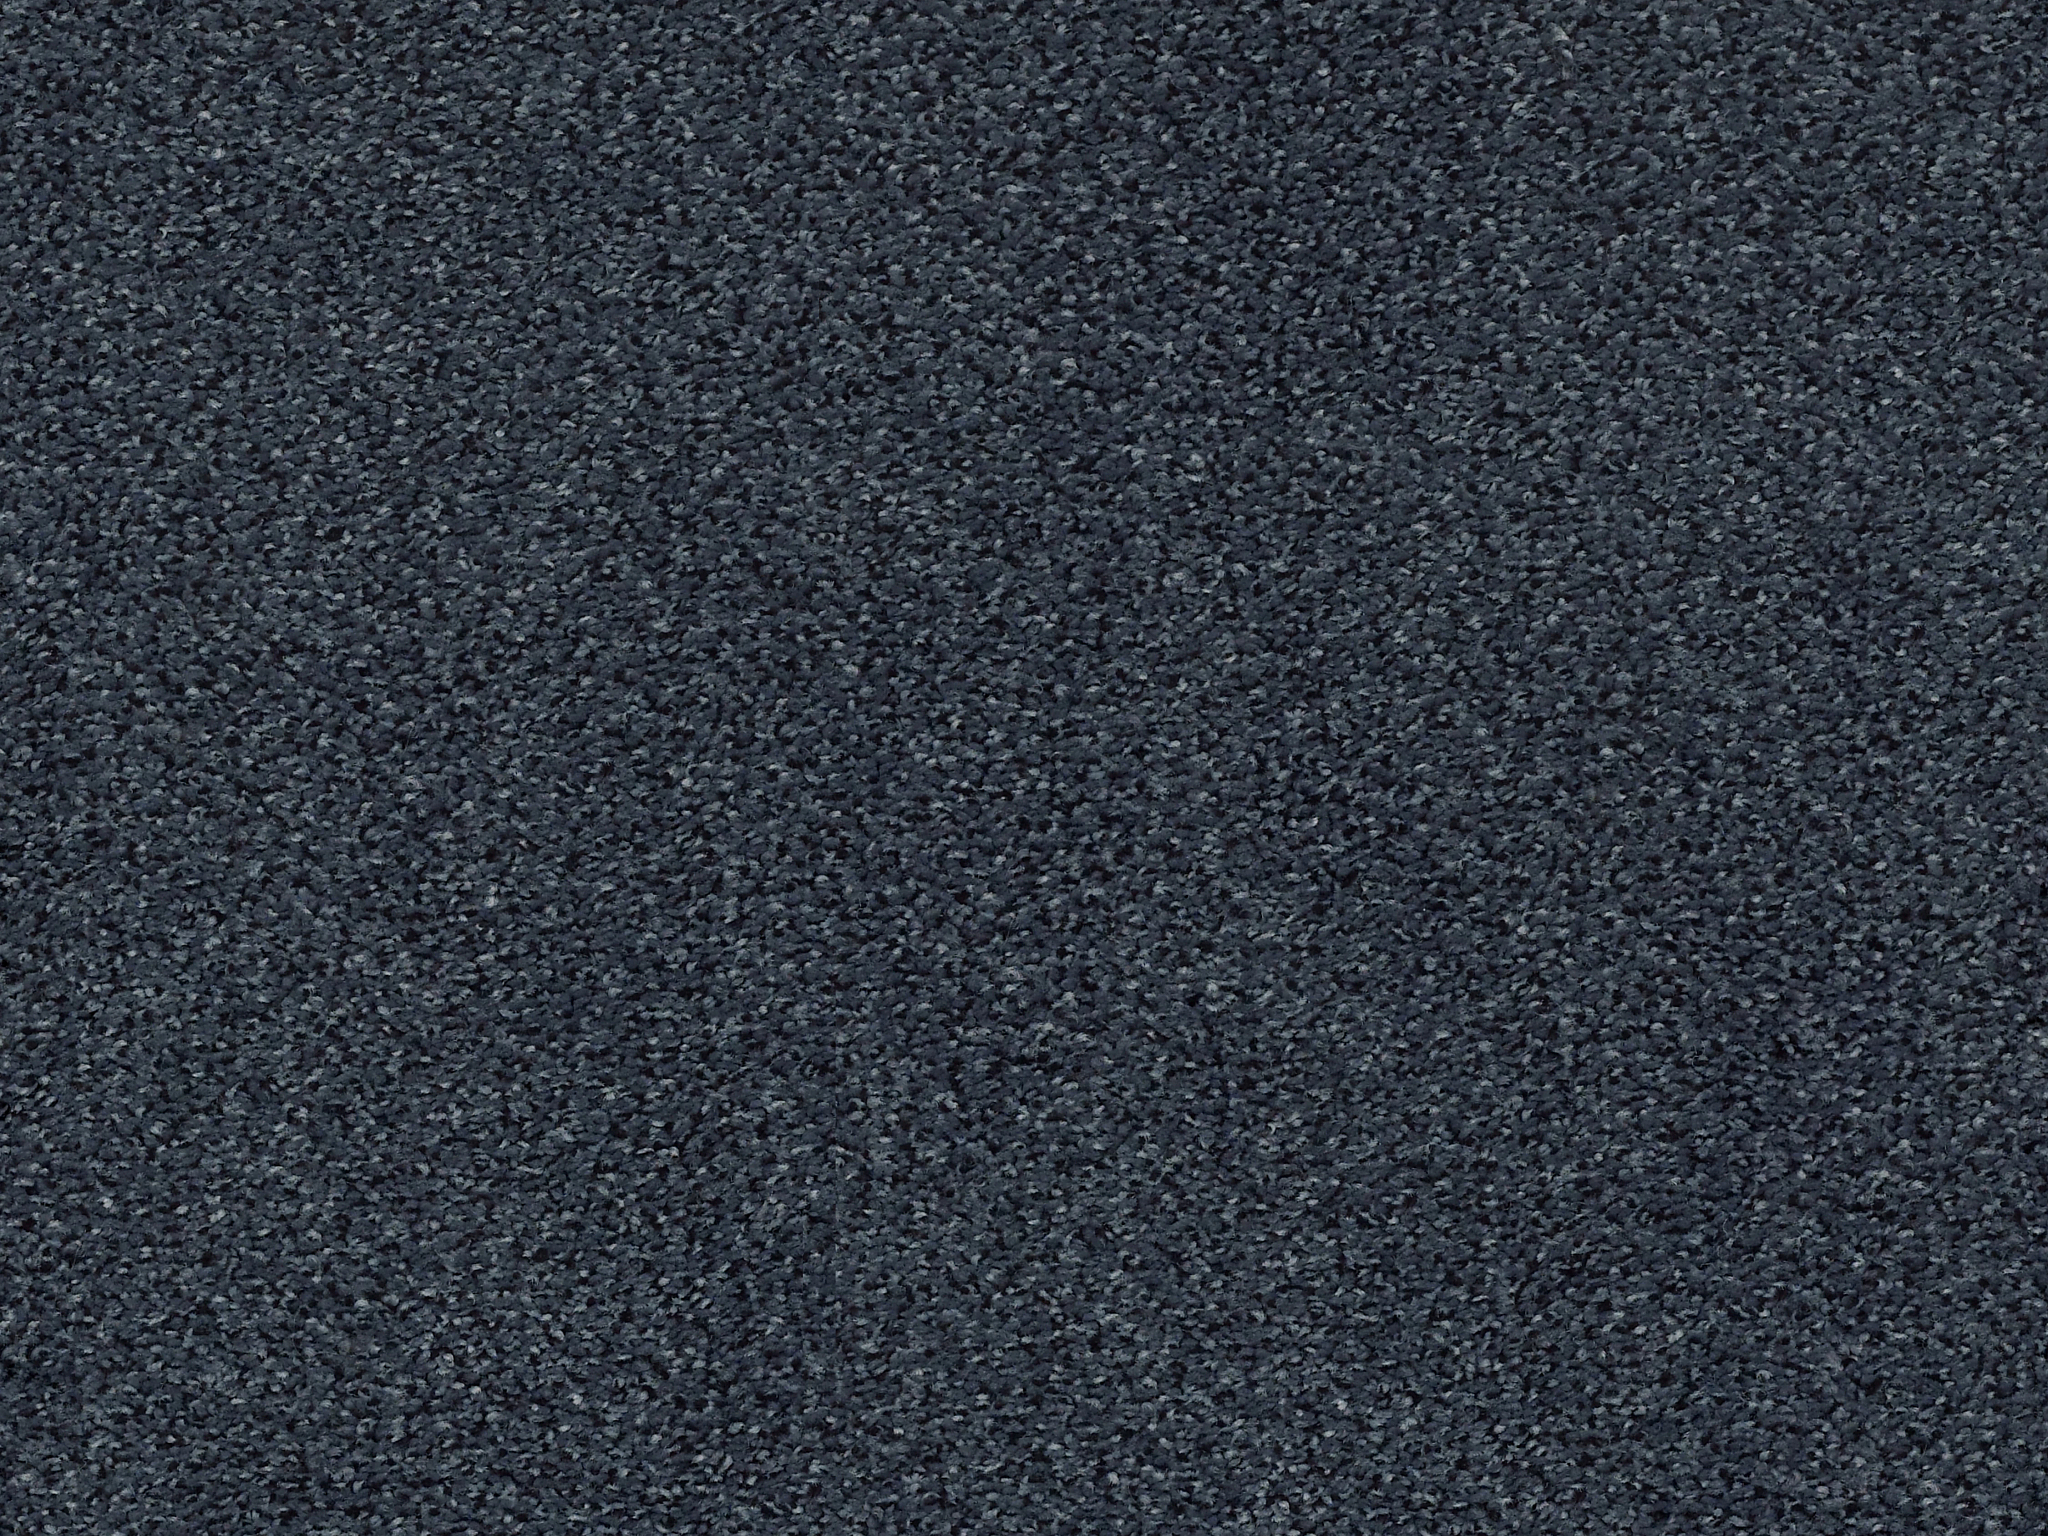 Serenity Cove Carpet - Blue Jeans Zoomed Swatch Thumbnail